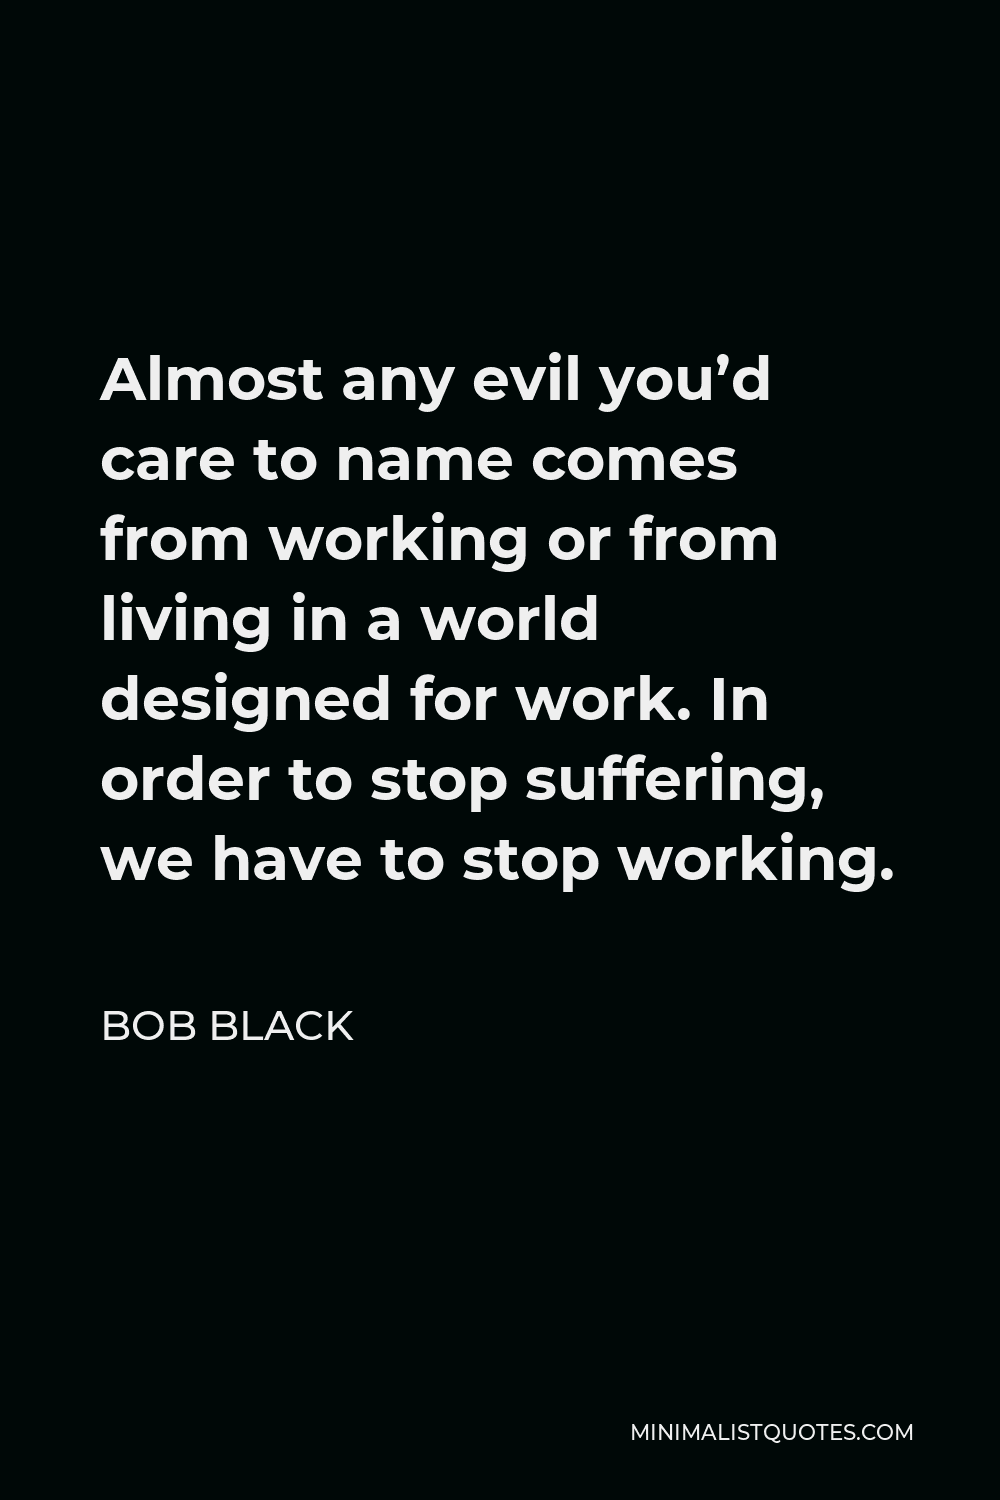 Bob Black Quote - Almost any evil you’d care to name comes from working or from living in a world designed for work. In order to stop suffering, we have to stop working.